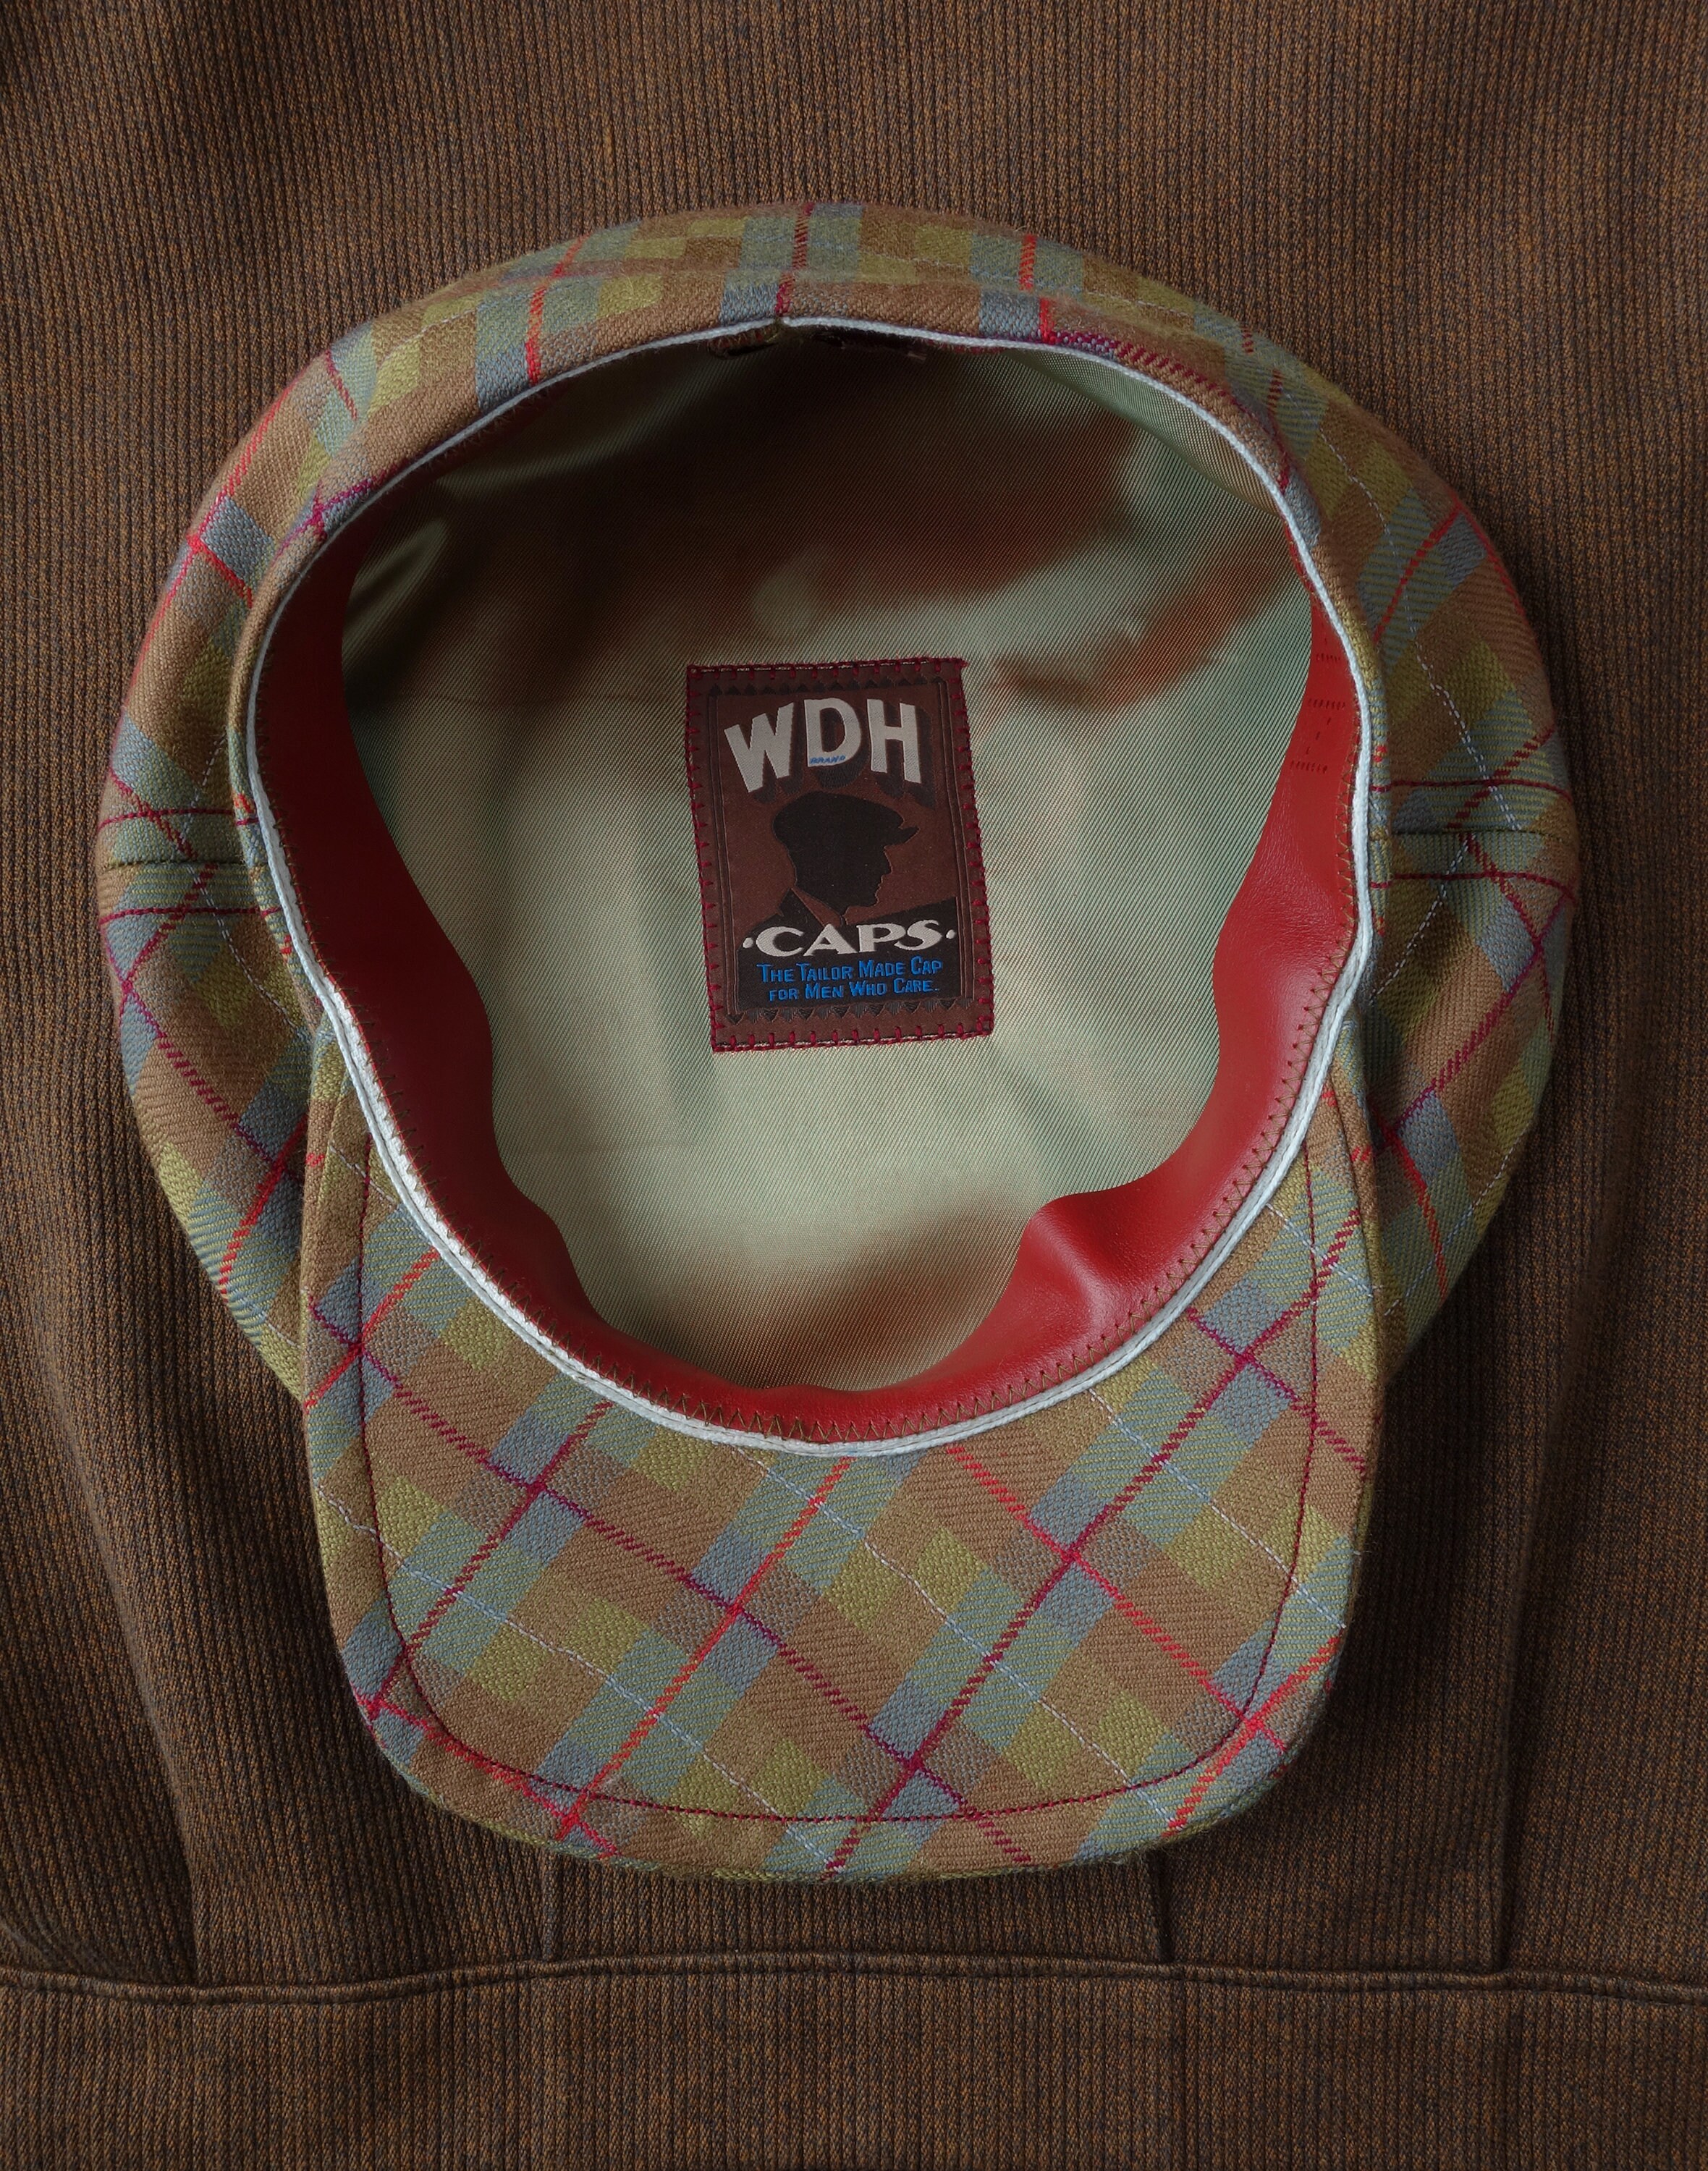 Review: Dashing Tweeds flat cap with reflective weave